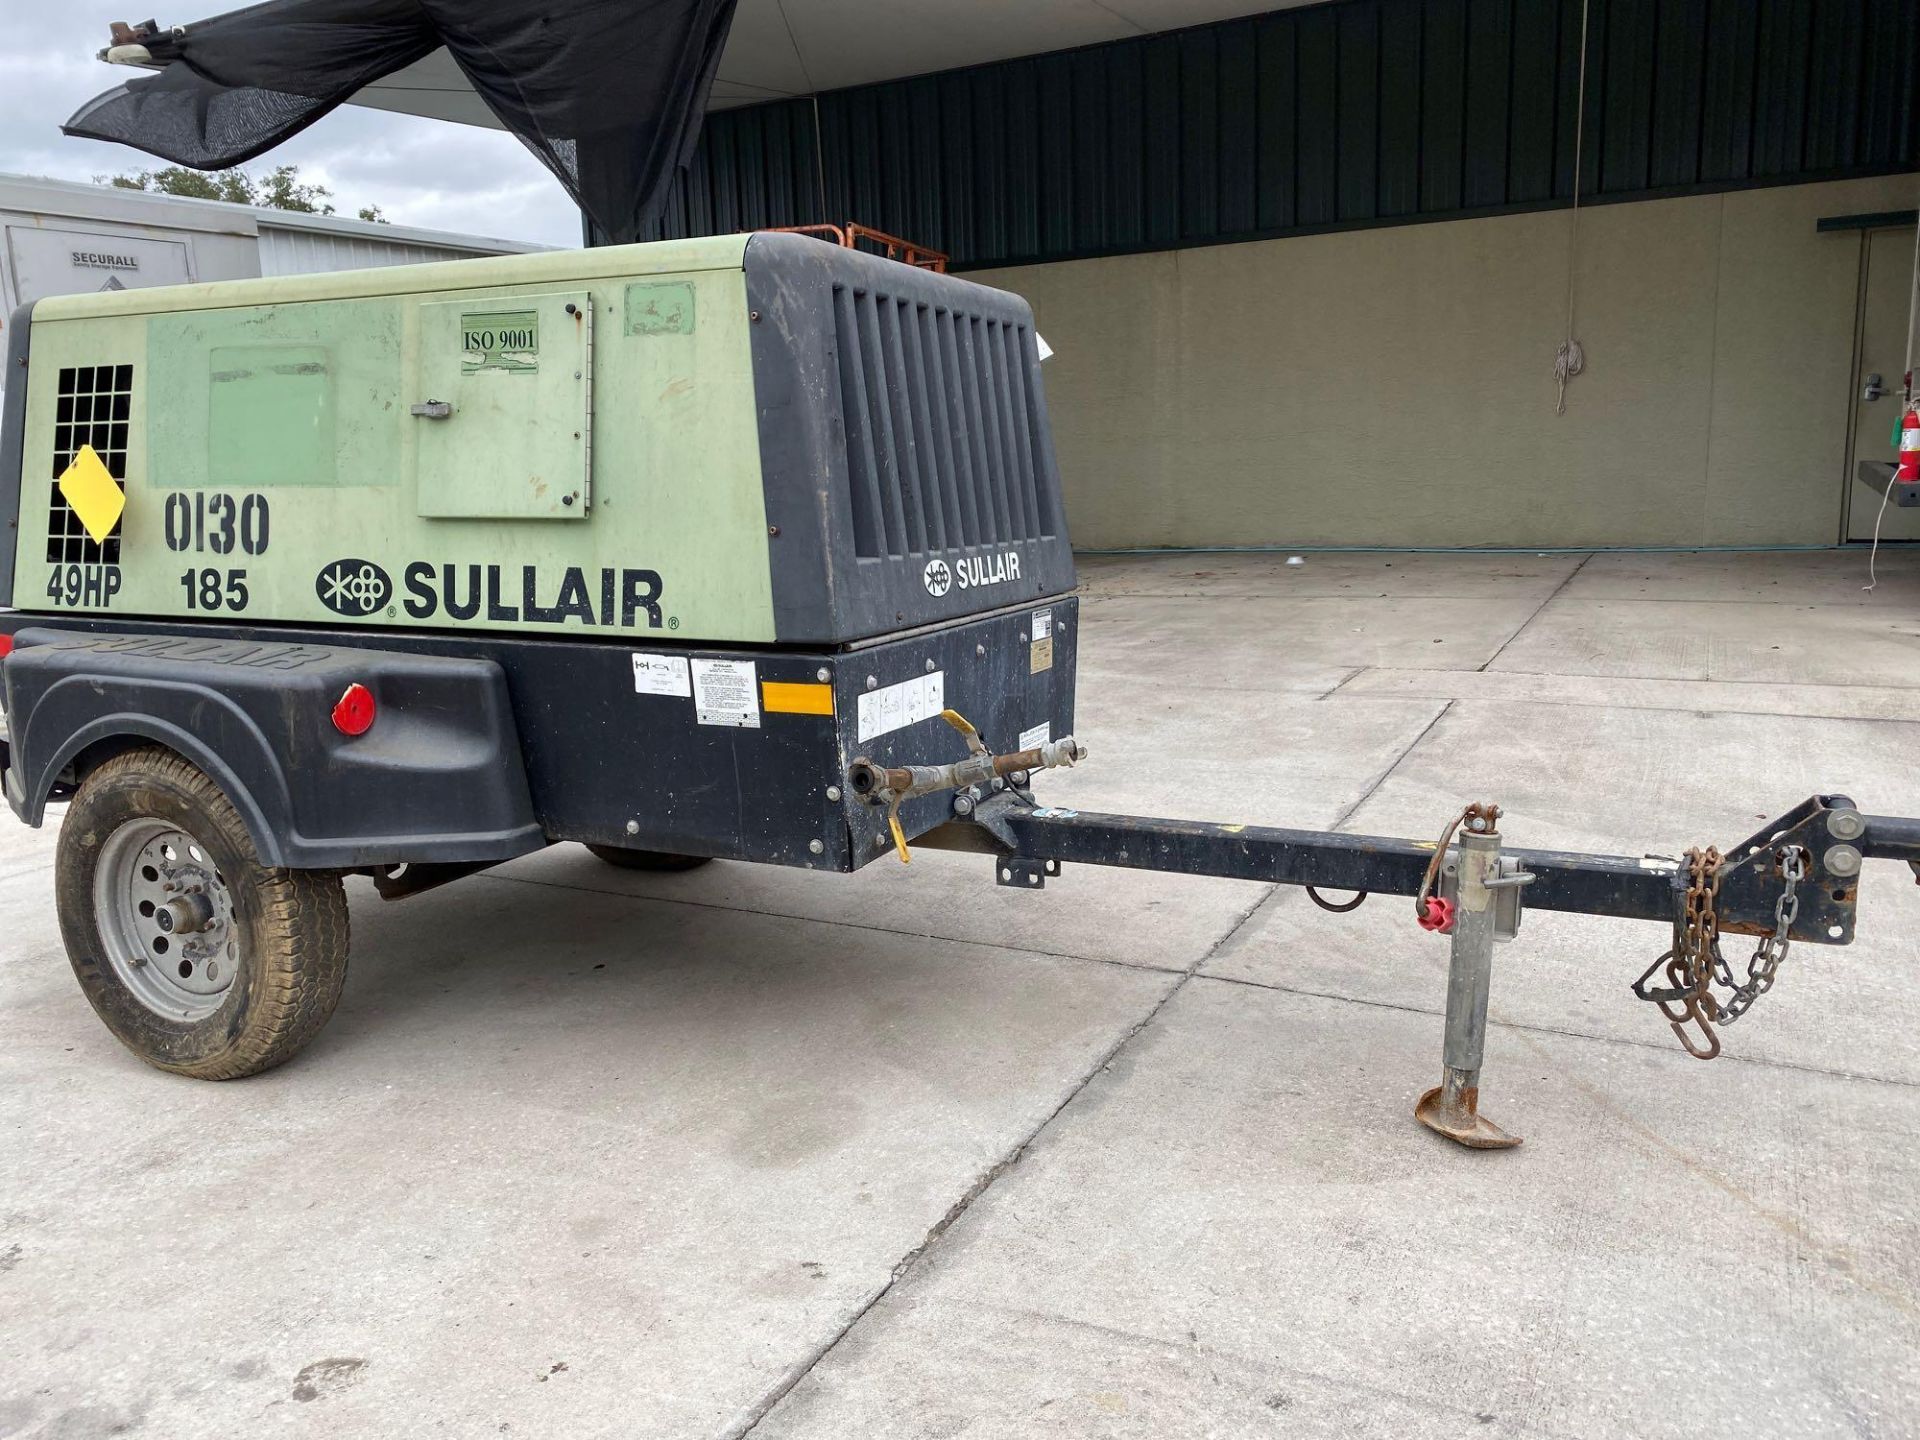 SULLAIR 185 TRAILER MOUNTED AIR COMPRESSOR, TURNS OVER, WOULDN'T START, 49 HP - Image 2 of 12